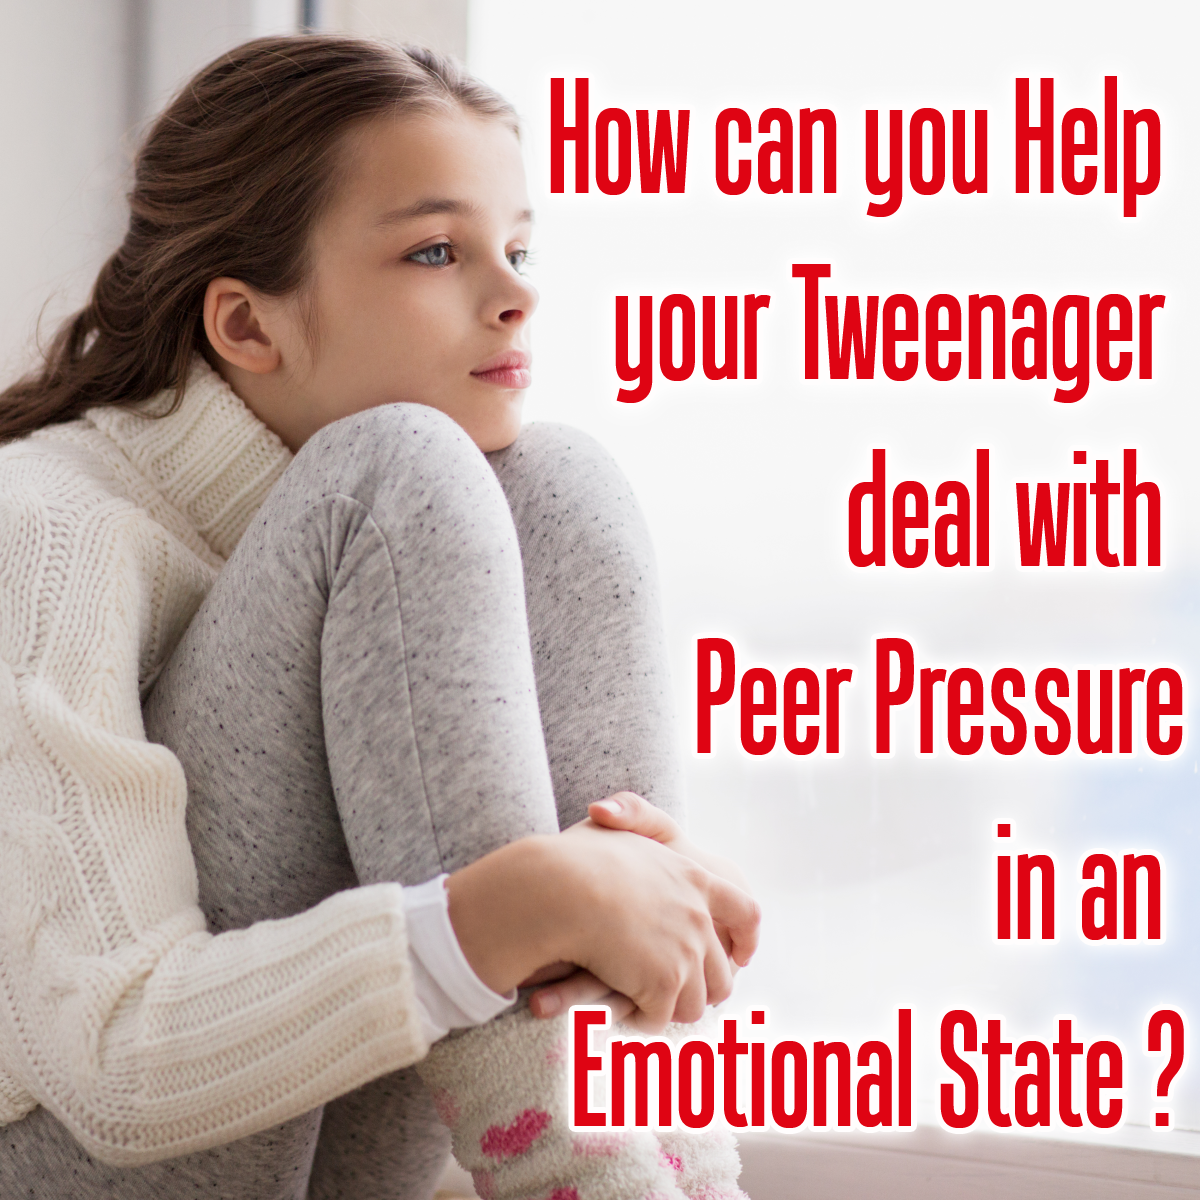 How can you help your tweenager deal with peer pressure in an emotional state?